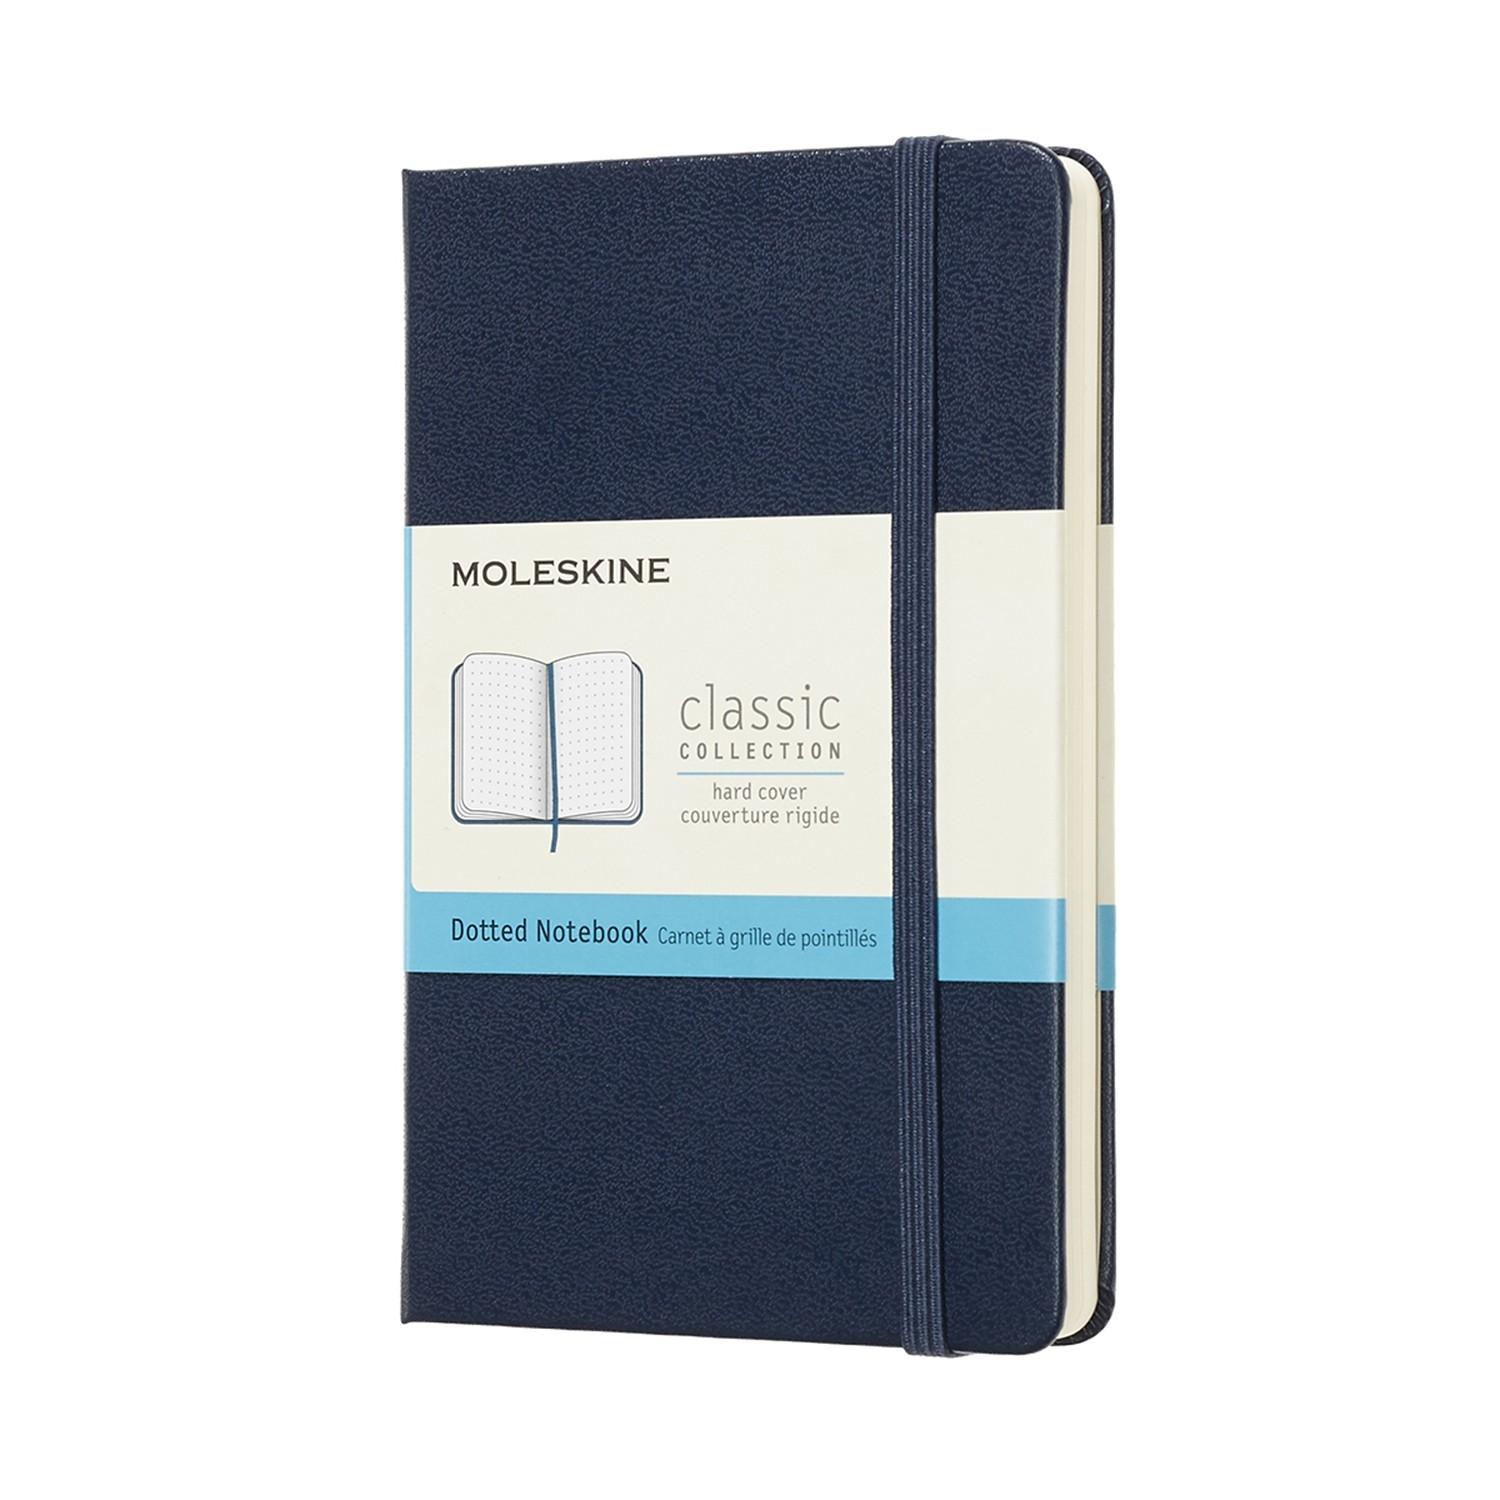 Moleskine Notebook Large Dotted Sapphire Blue Hard COVER